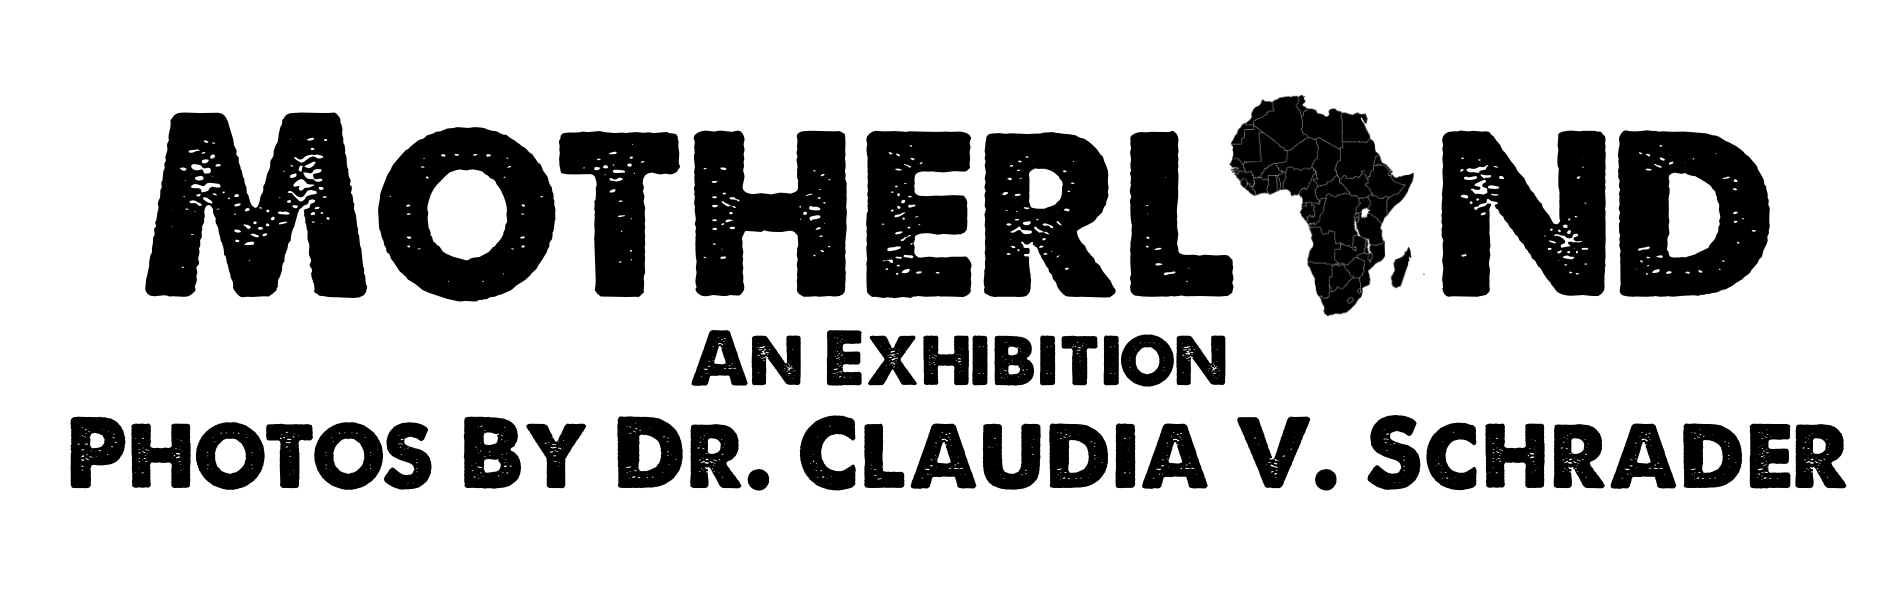 Motherland, an Exhibition by Dr. Claudia V. Schrader